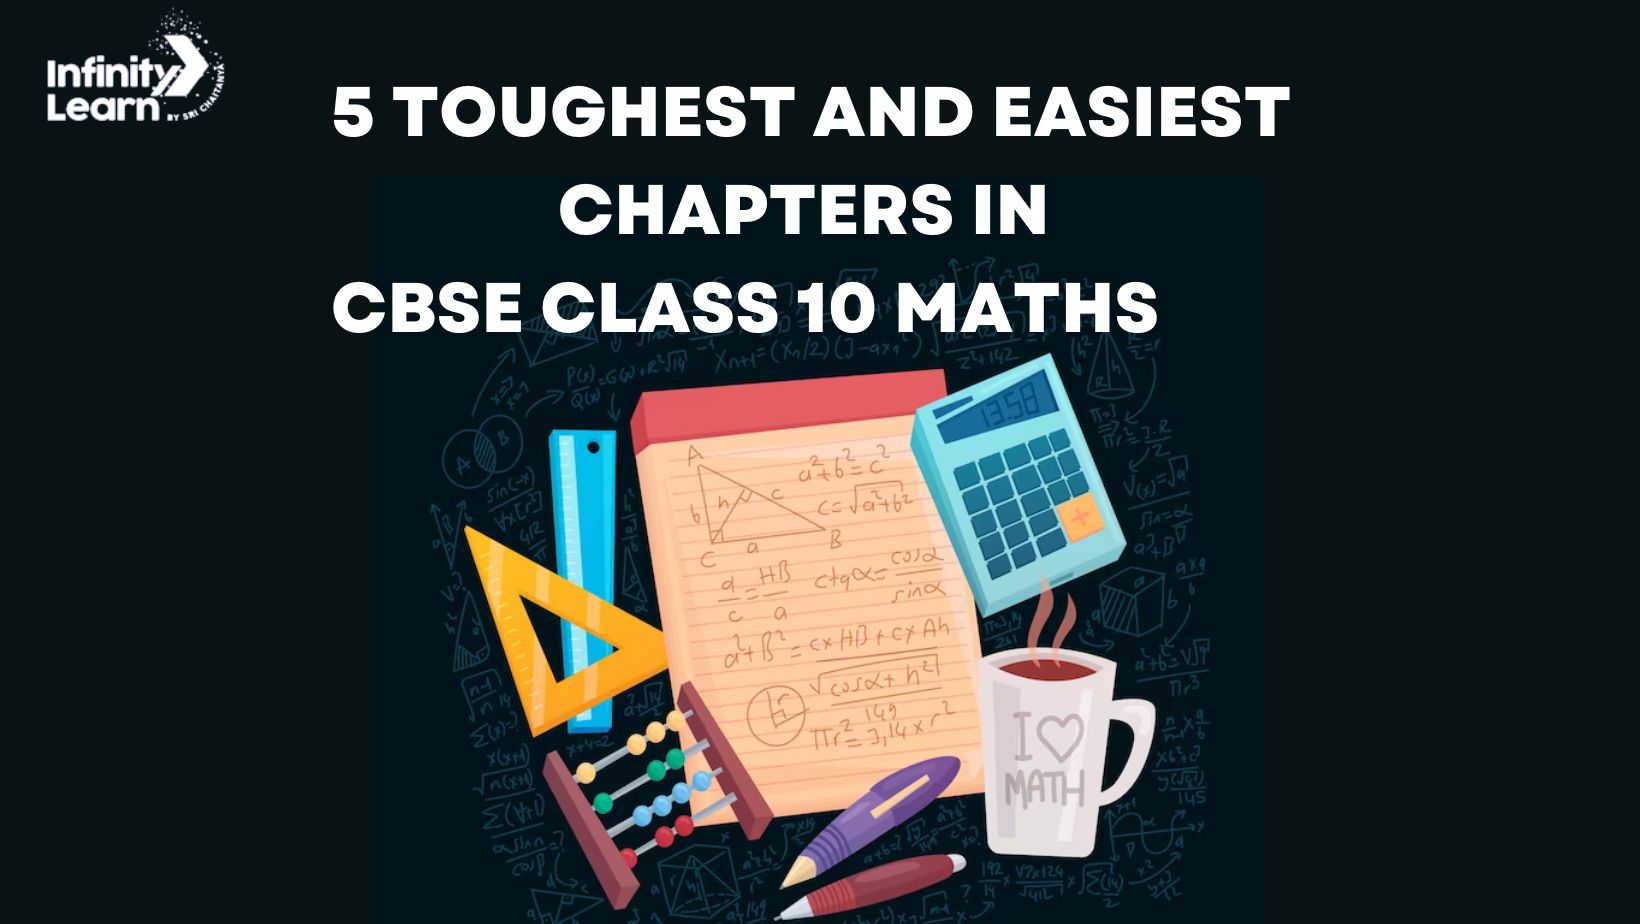 5 Toughest and Easiest Chapters in CBSE Class 10 Maths